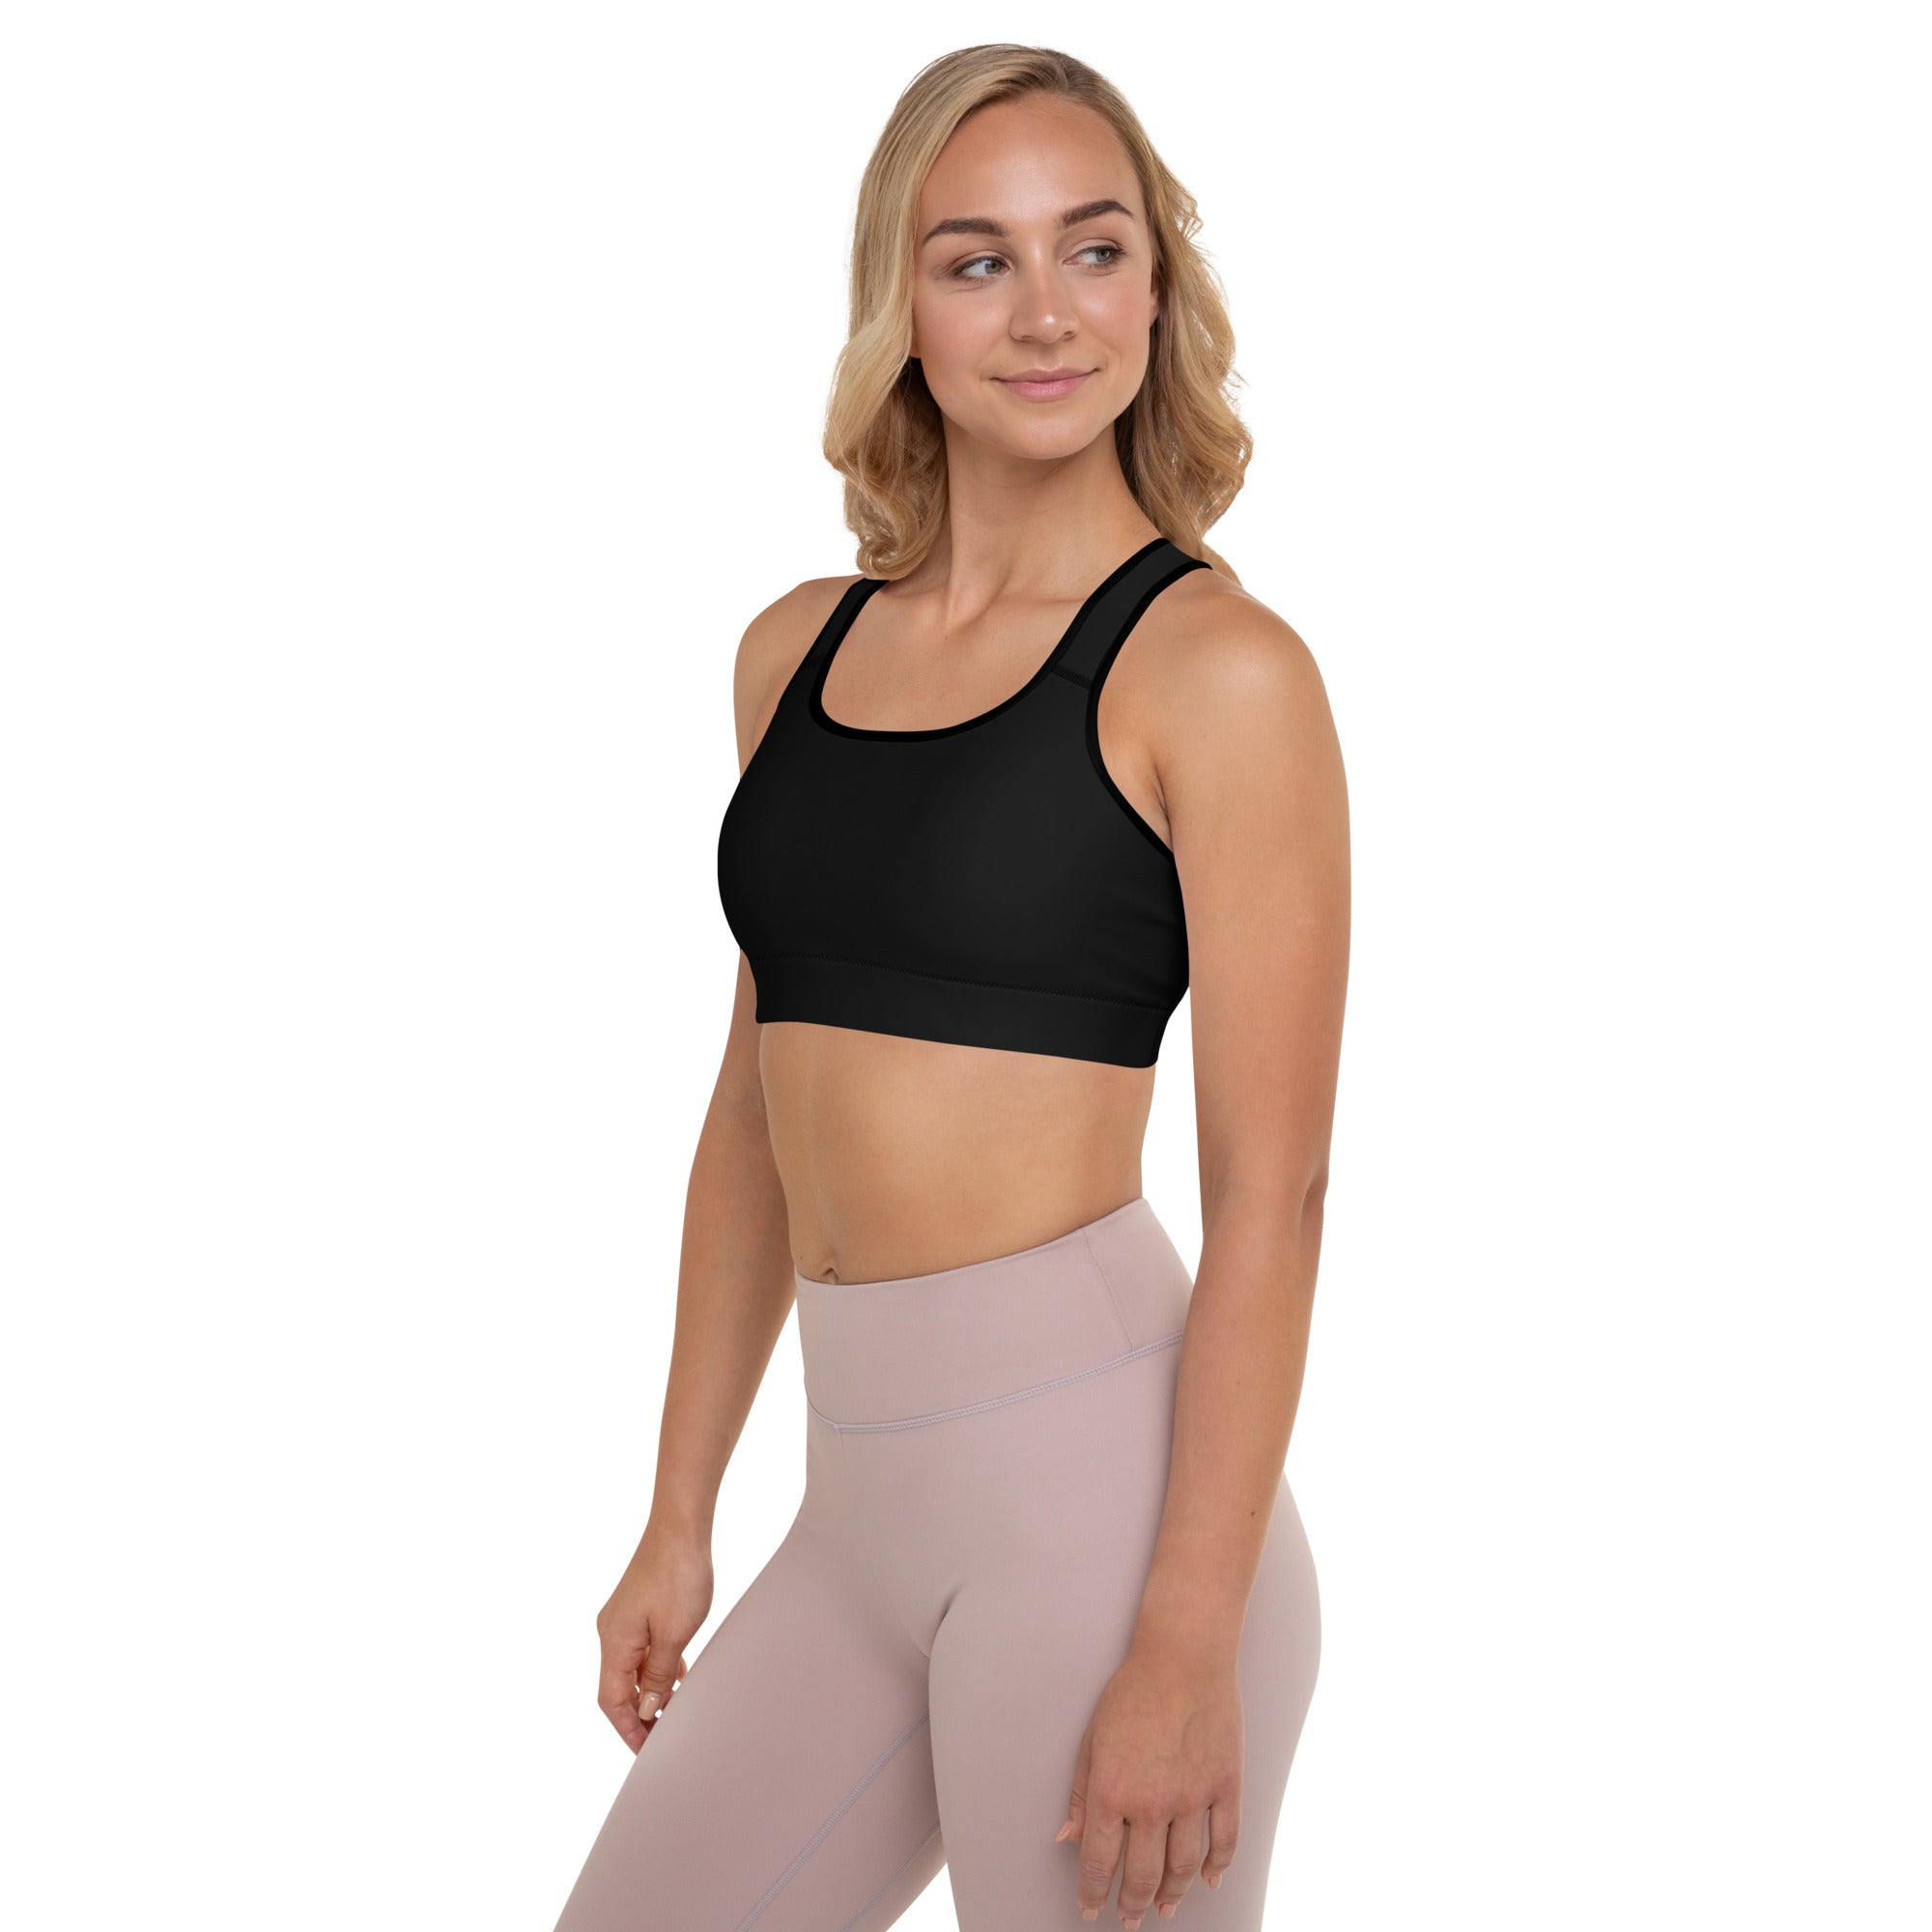 a woman wearing a Sweetest Paw Padded Sports Bra Black top and pink leggings.